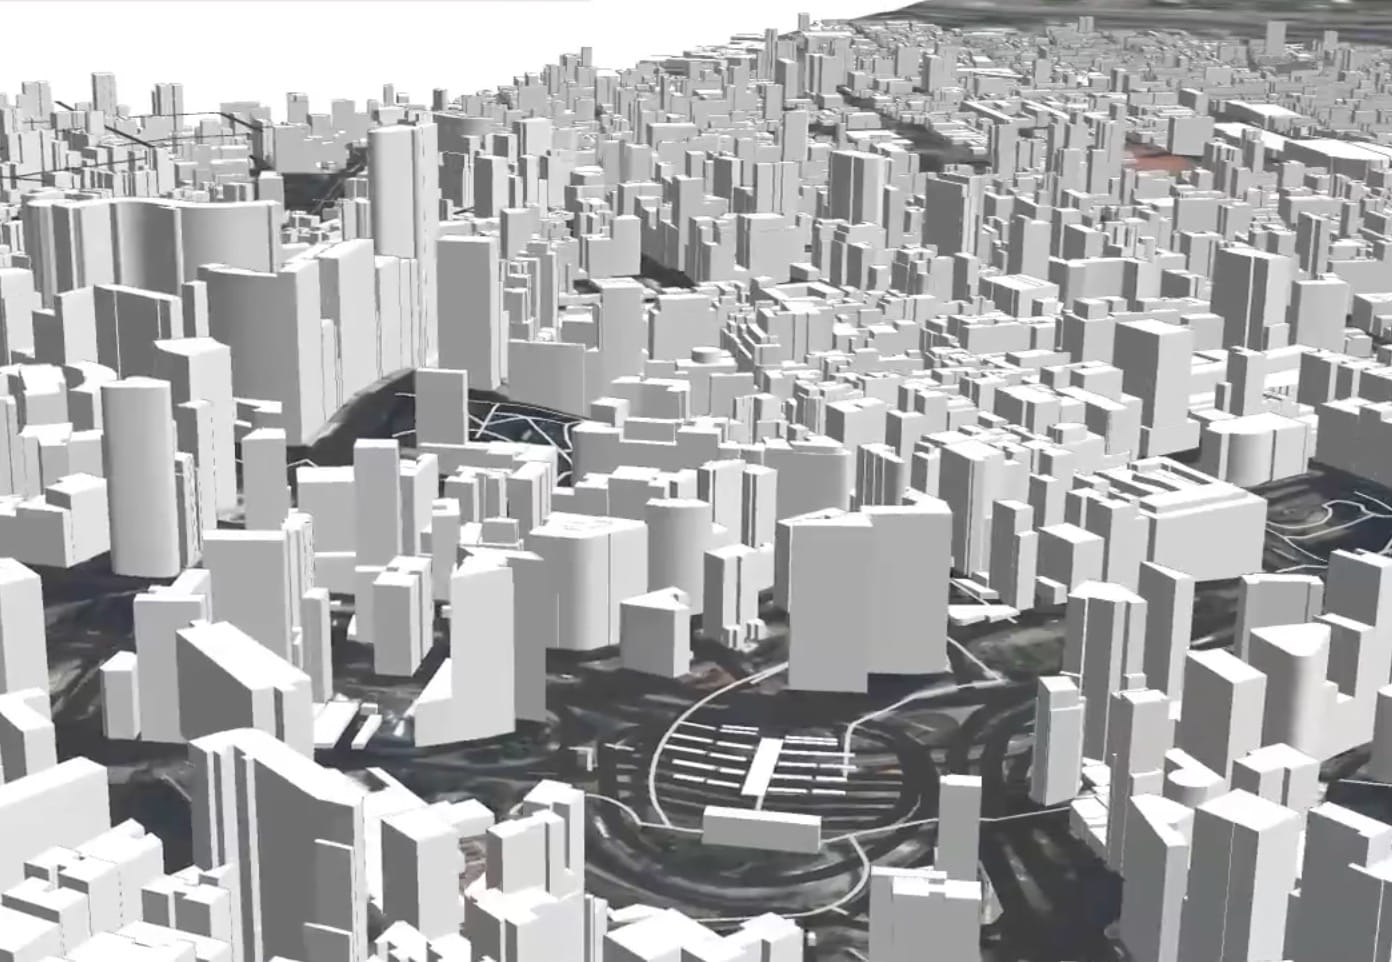  A 3D model of a city instantly created with PlaceMaker 